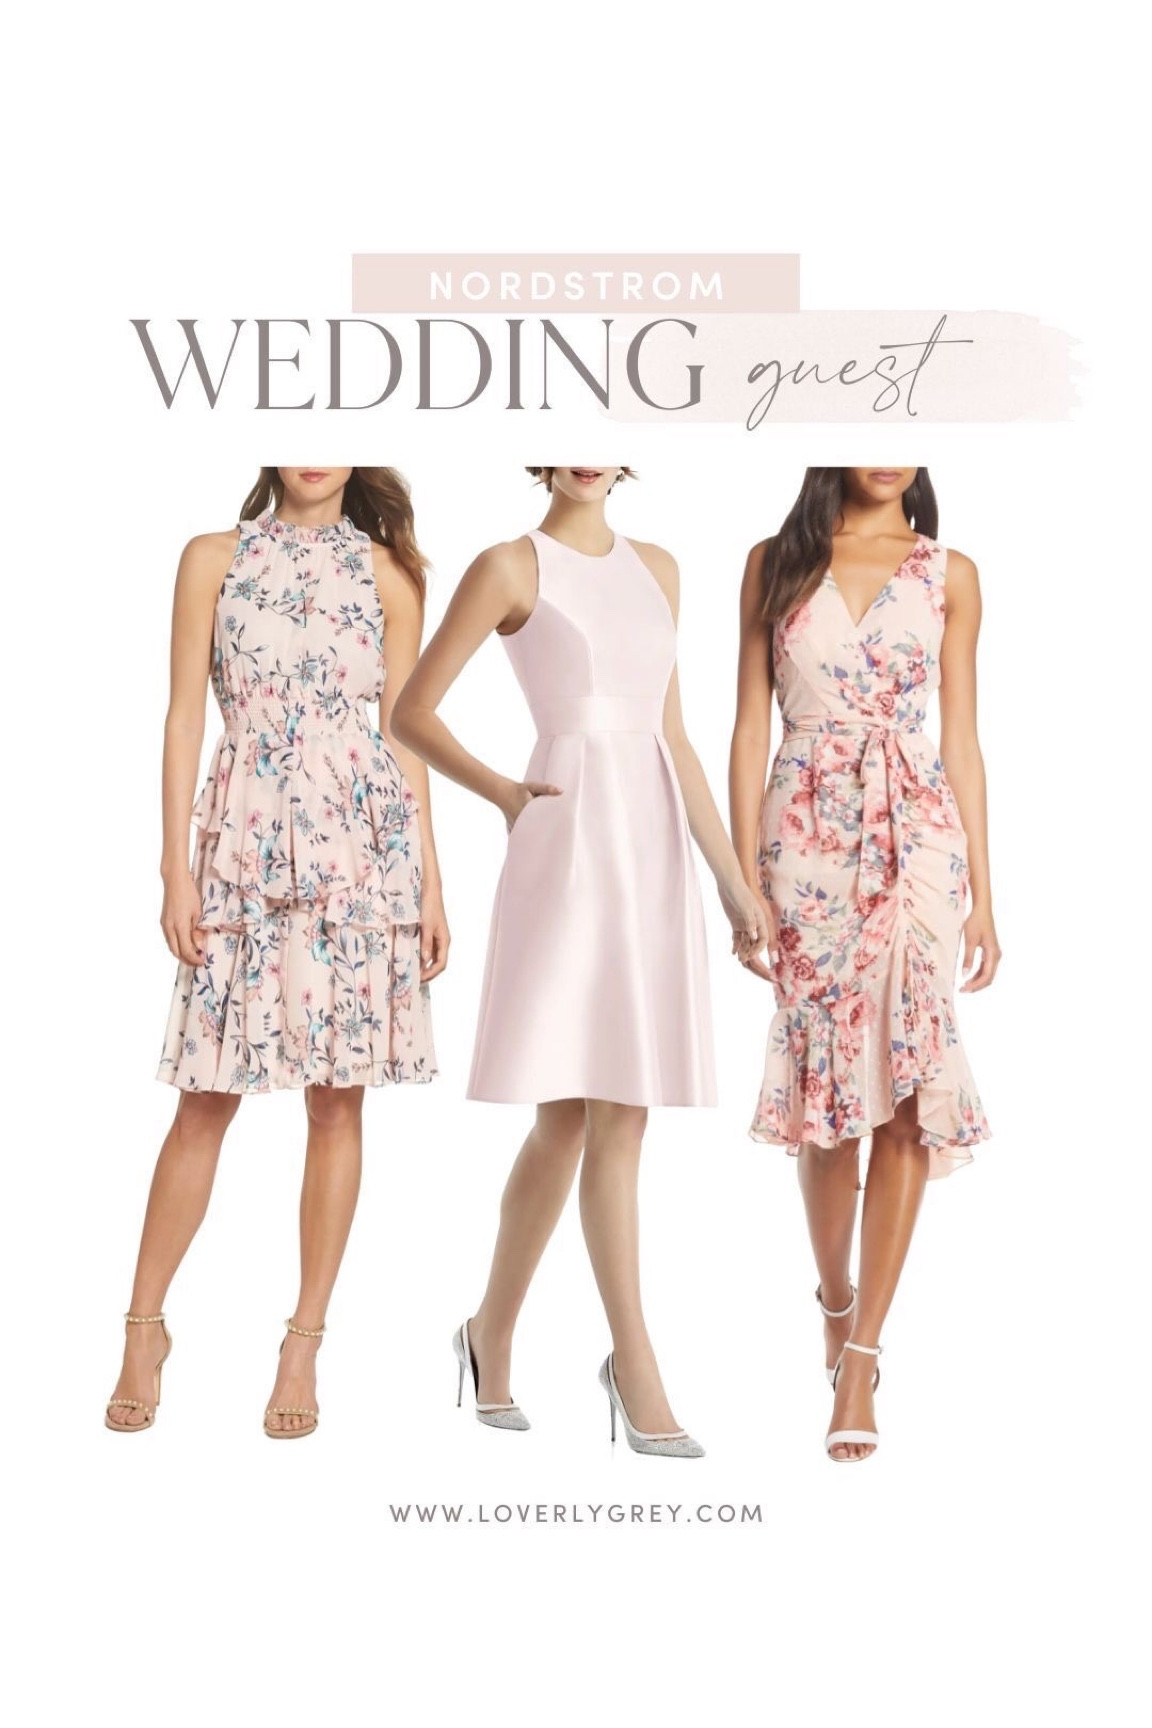 Spring Wedding Guest Dress Guide - Loverly Grey